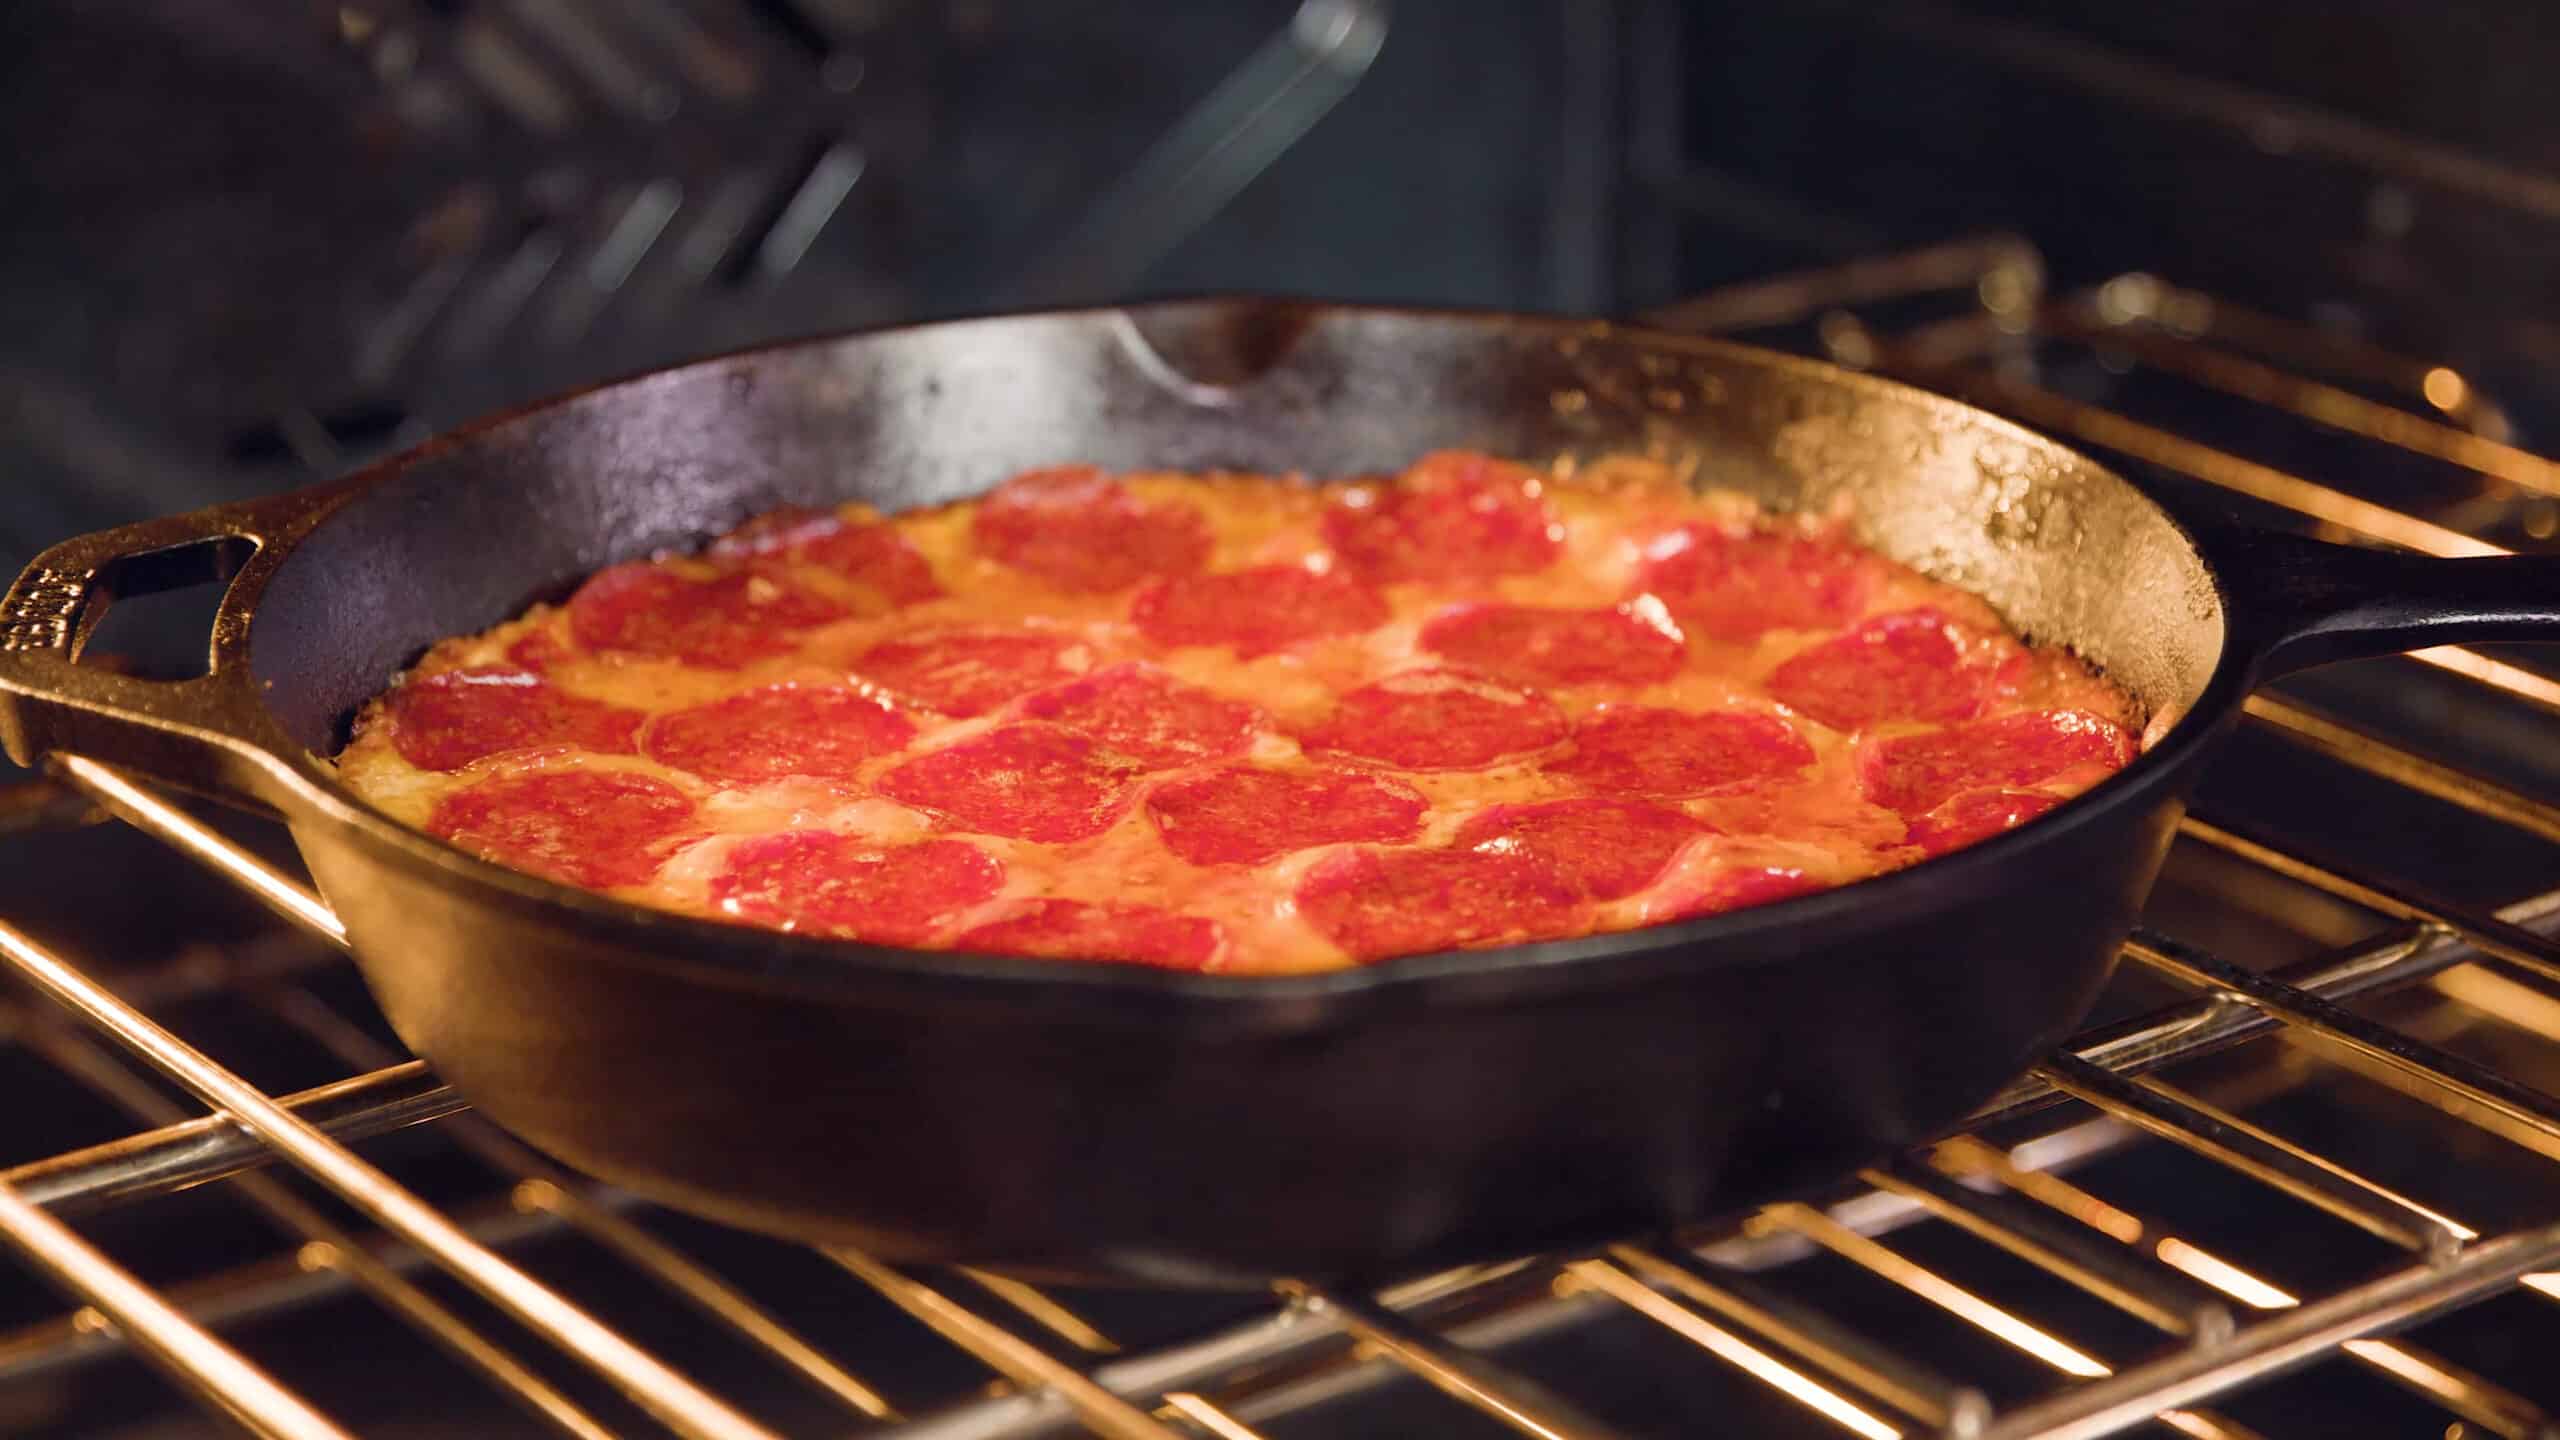 Close-up view of an open oven with a cast iron skillet filled with bubbling and sizzling pizza dip inside all on a metal rack in the middle of the oven.